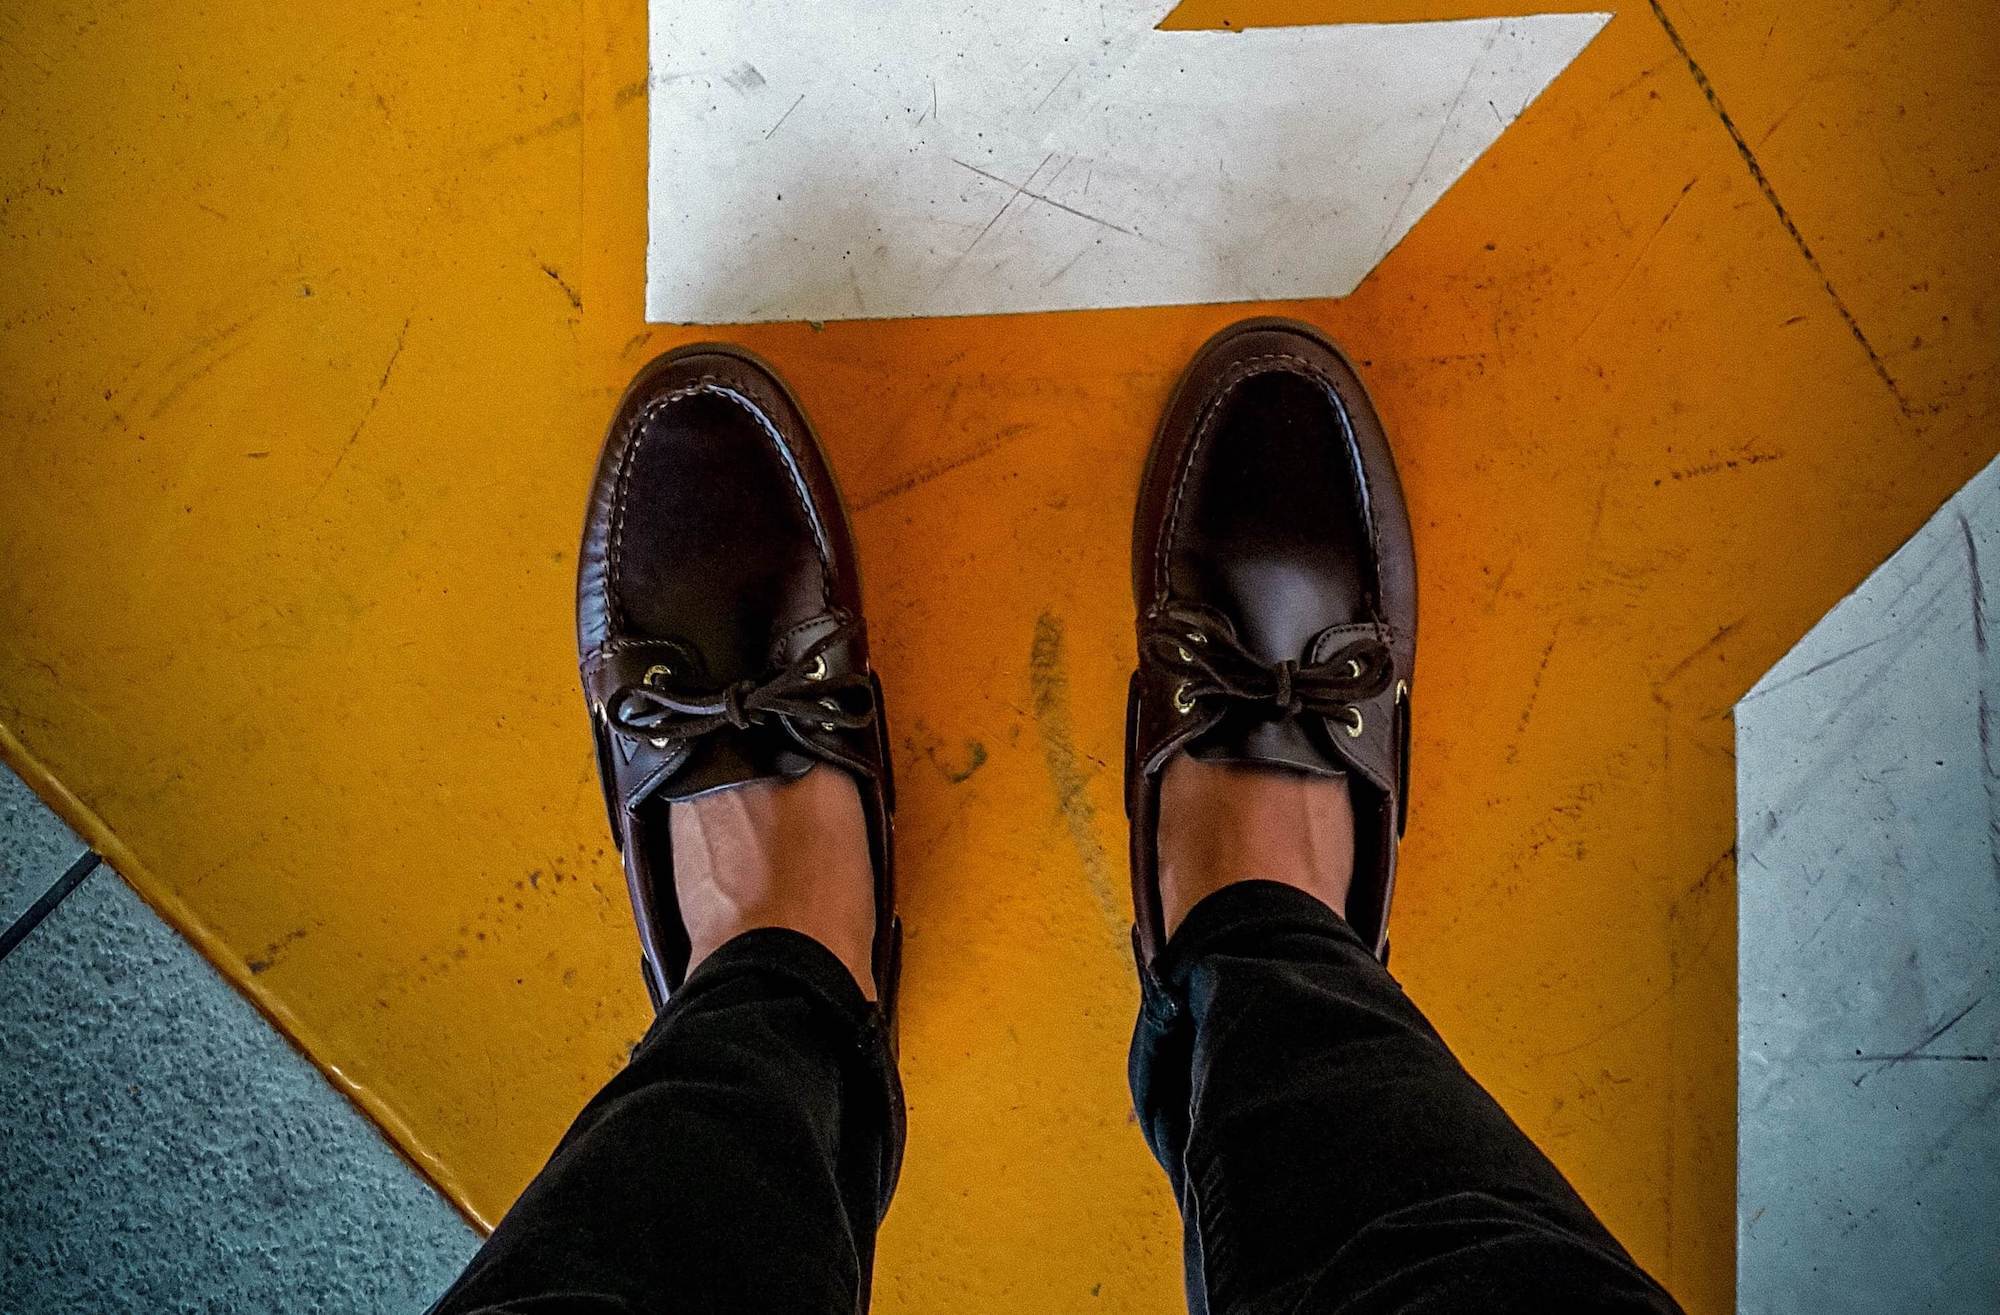 Man wearing leather boat shoes